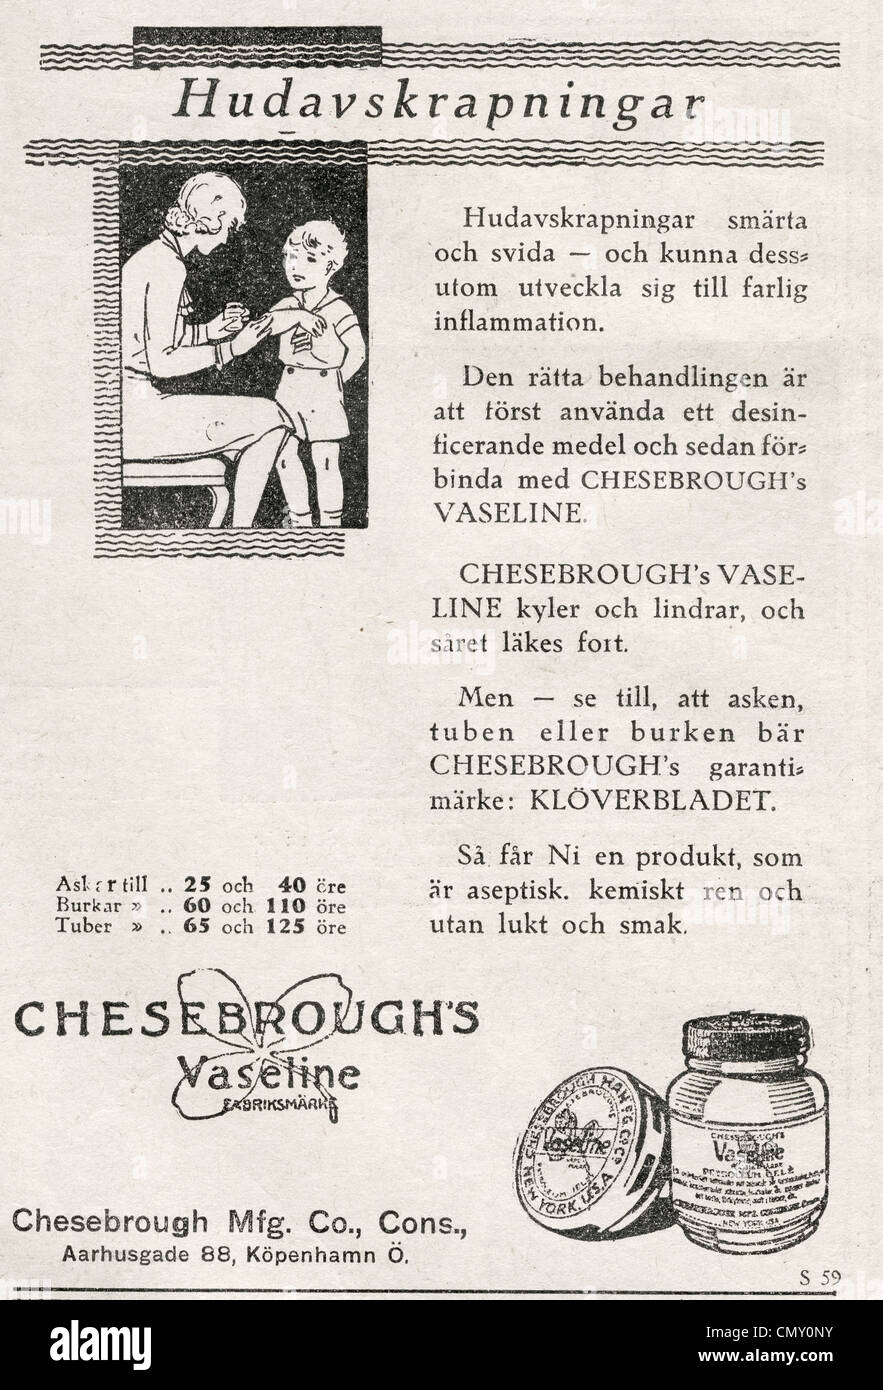 Swedish advertisement from 1930. Chesebrough's Vaseline. EDITORIAL USE ONLY! Stock Photo